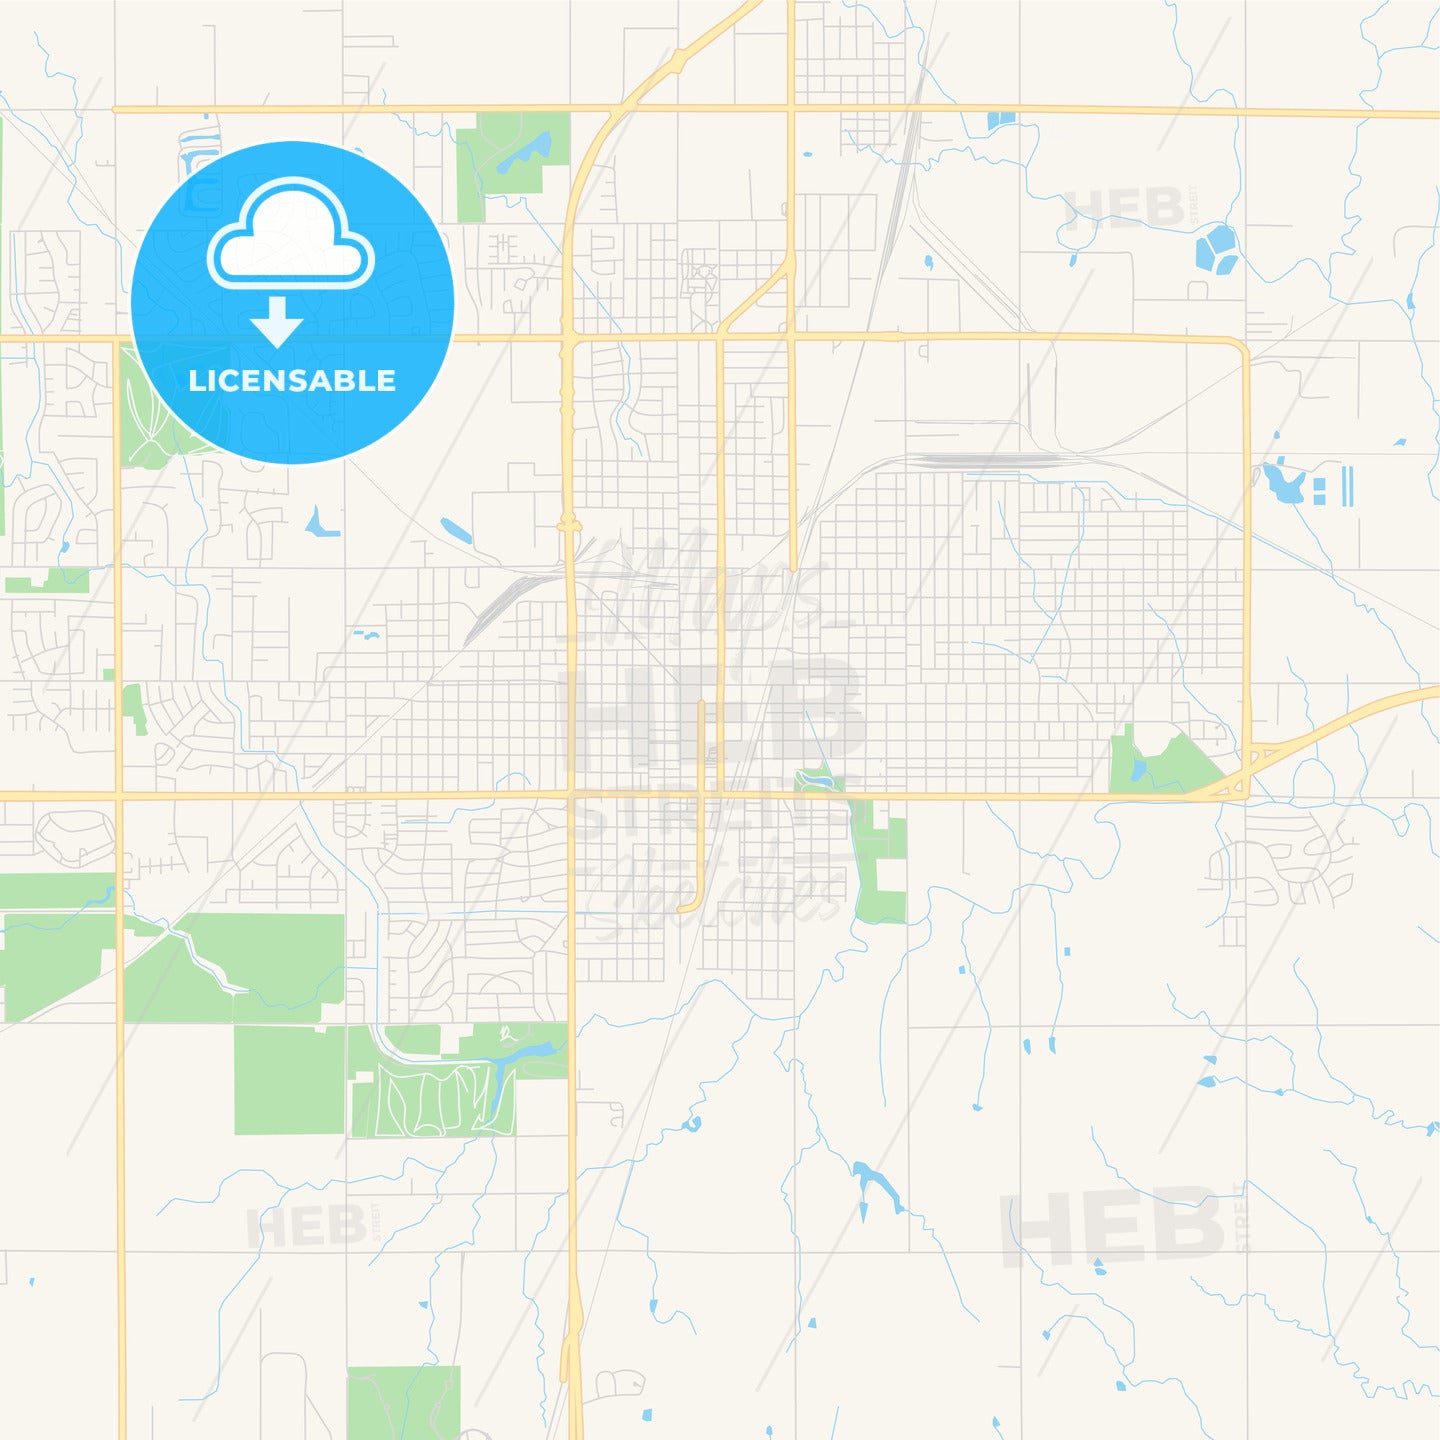 Empty vector map of Enid, Oklahoma, United States of America